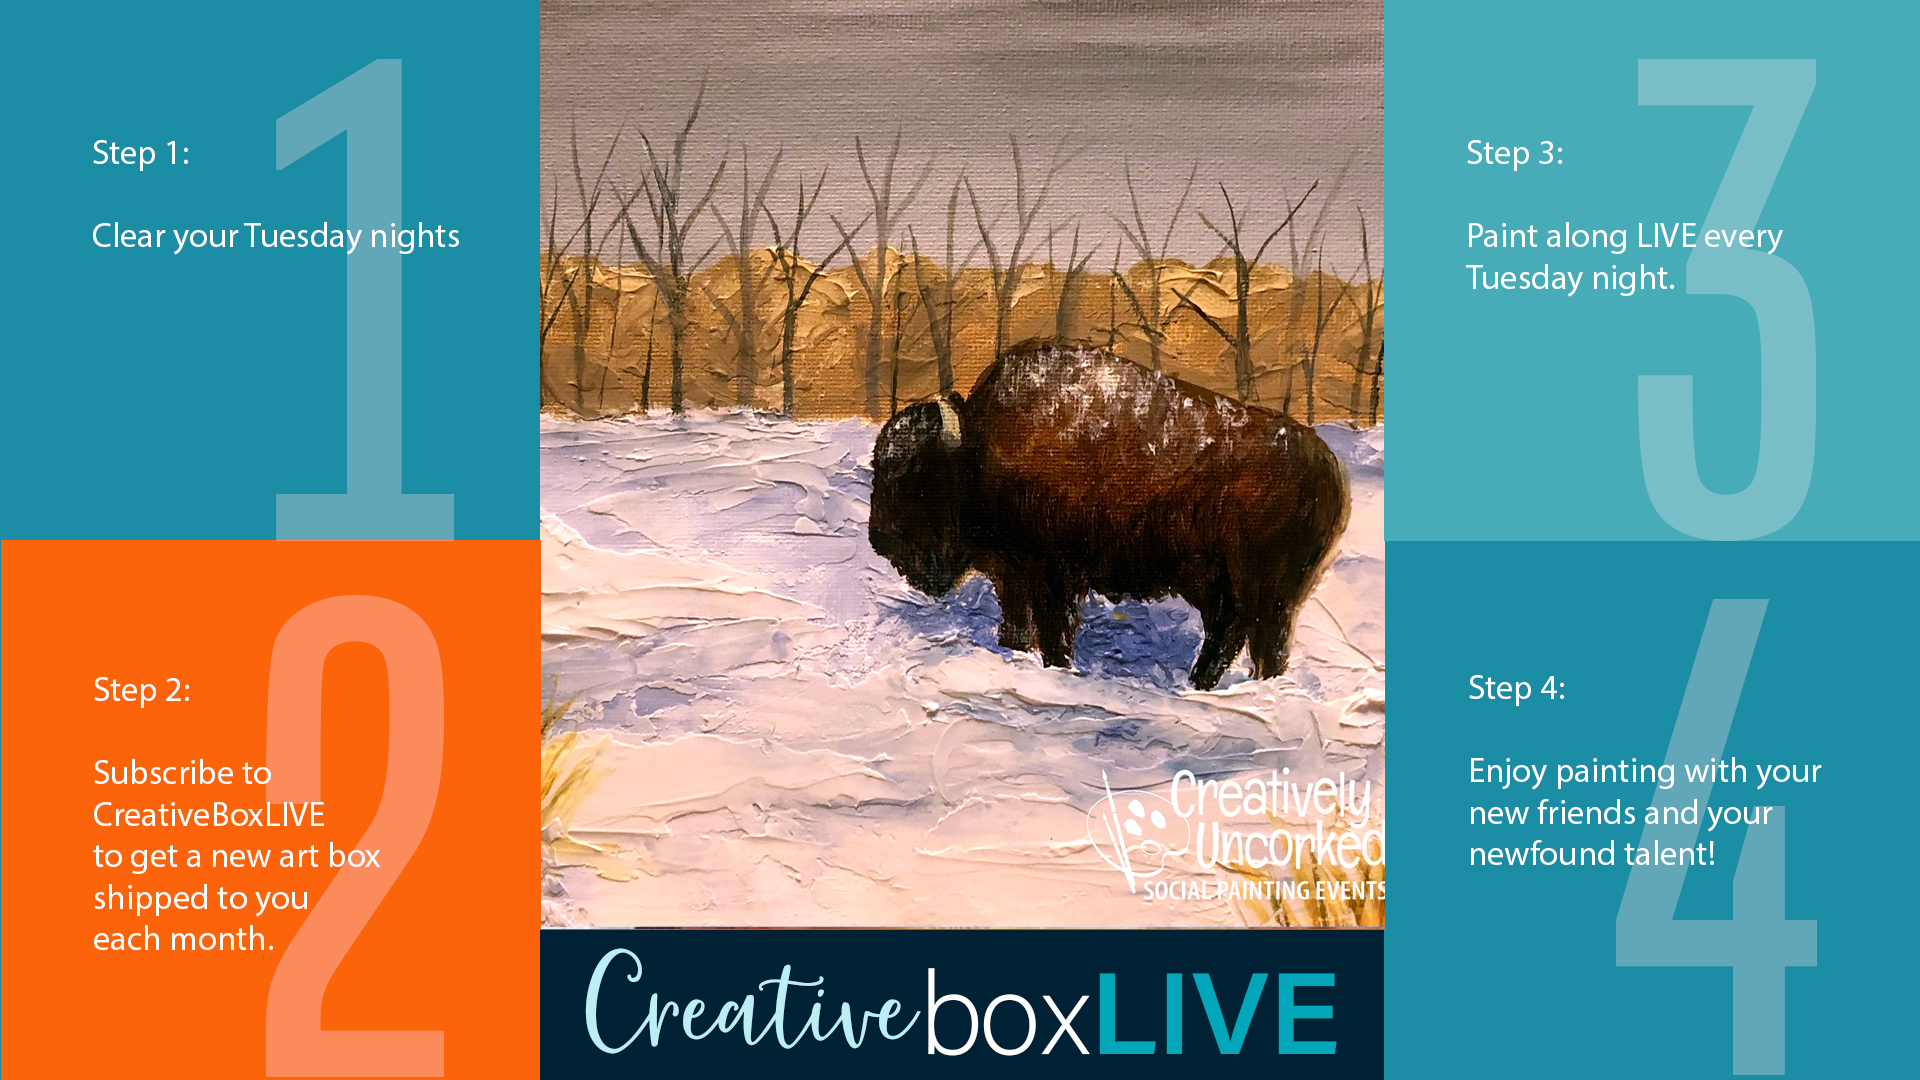 Snowy Bison CBL with CreativeBoxLIVE from Creatively Uncorked http://creativelyuncorked.com/